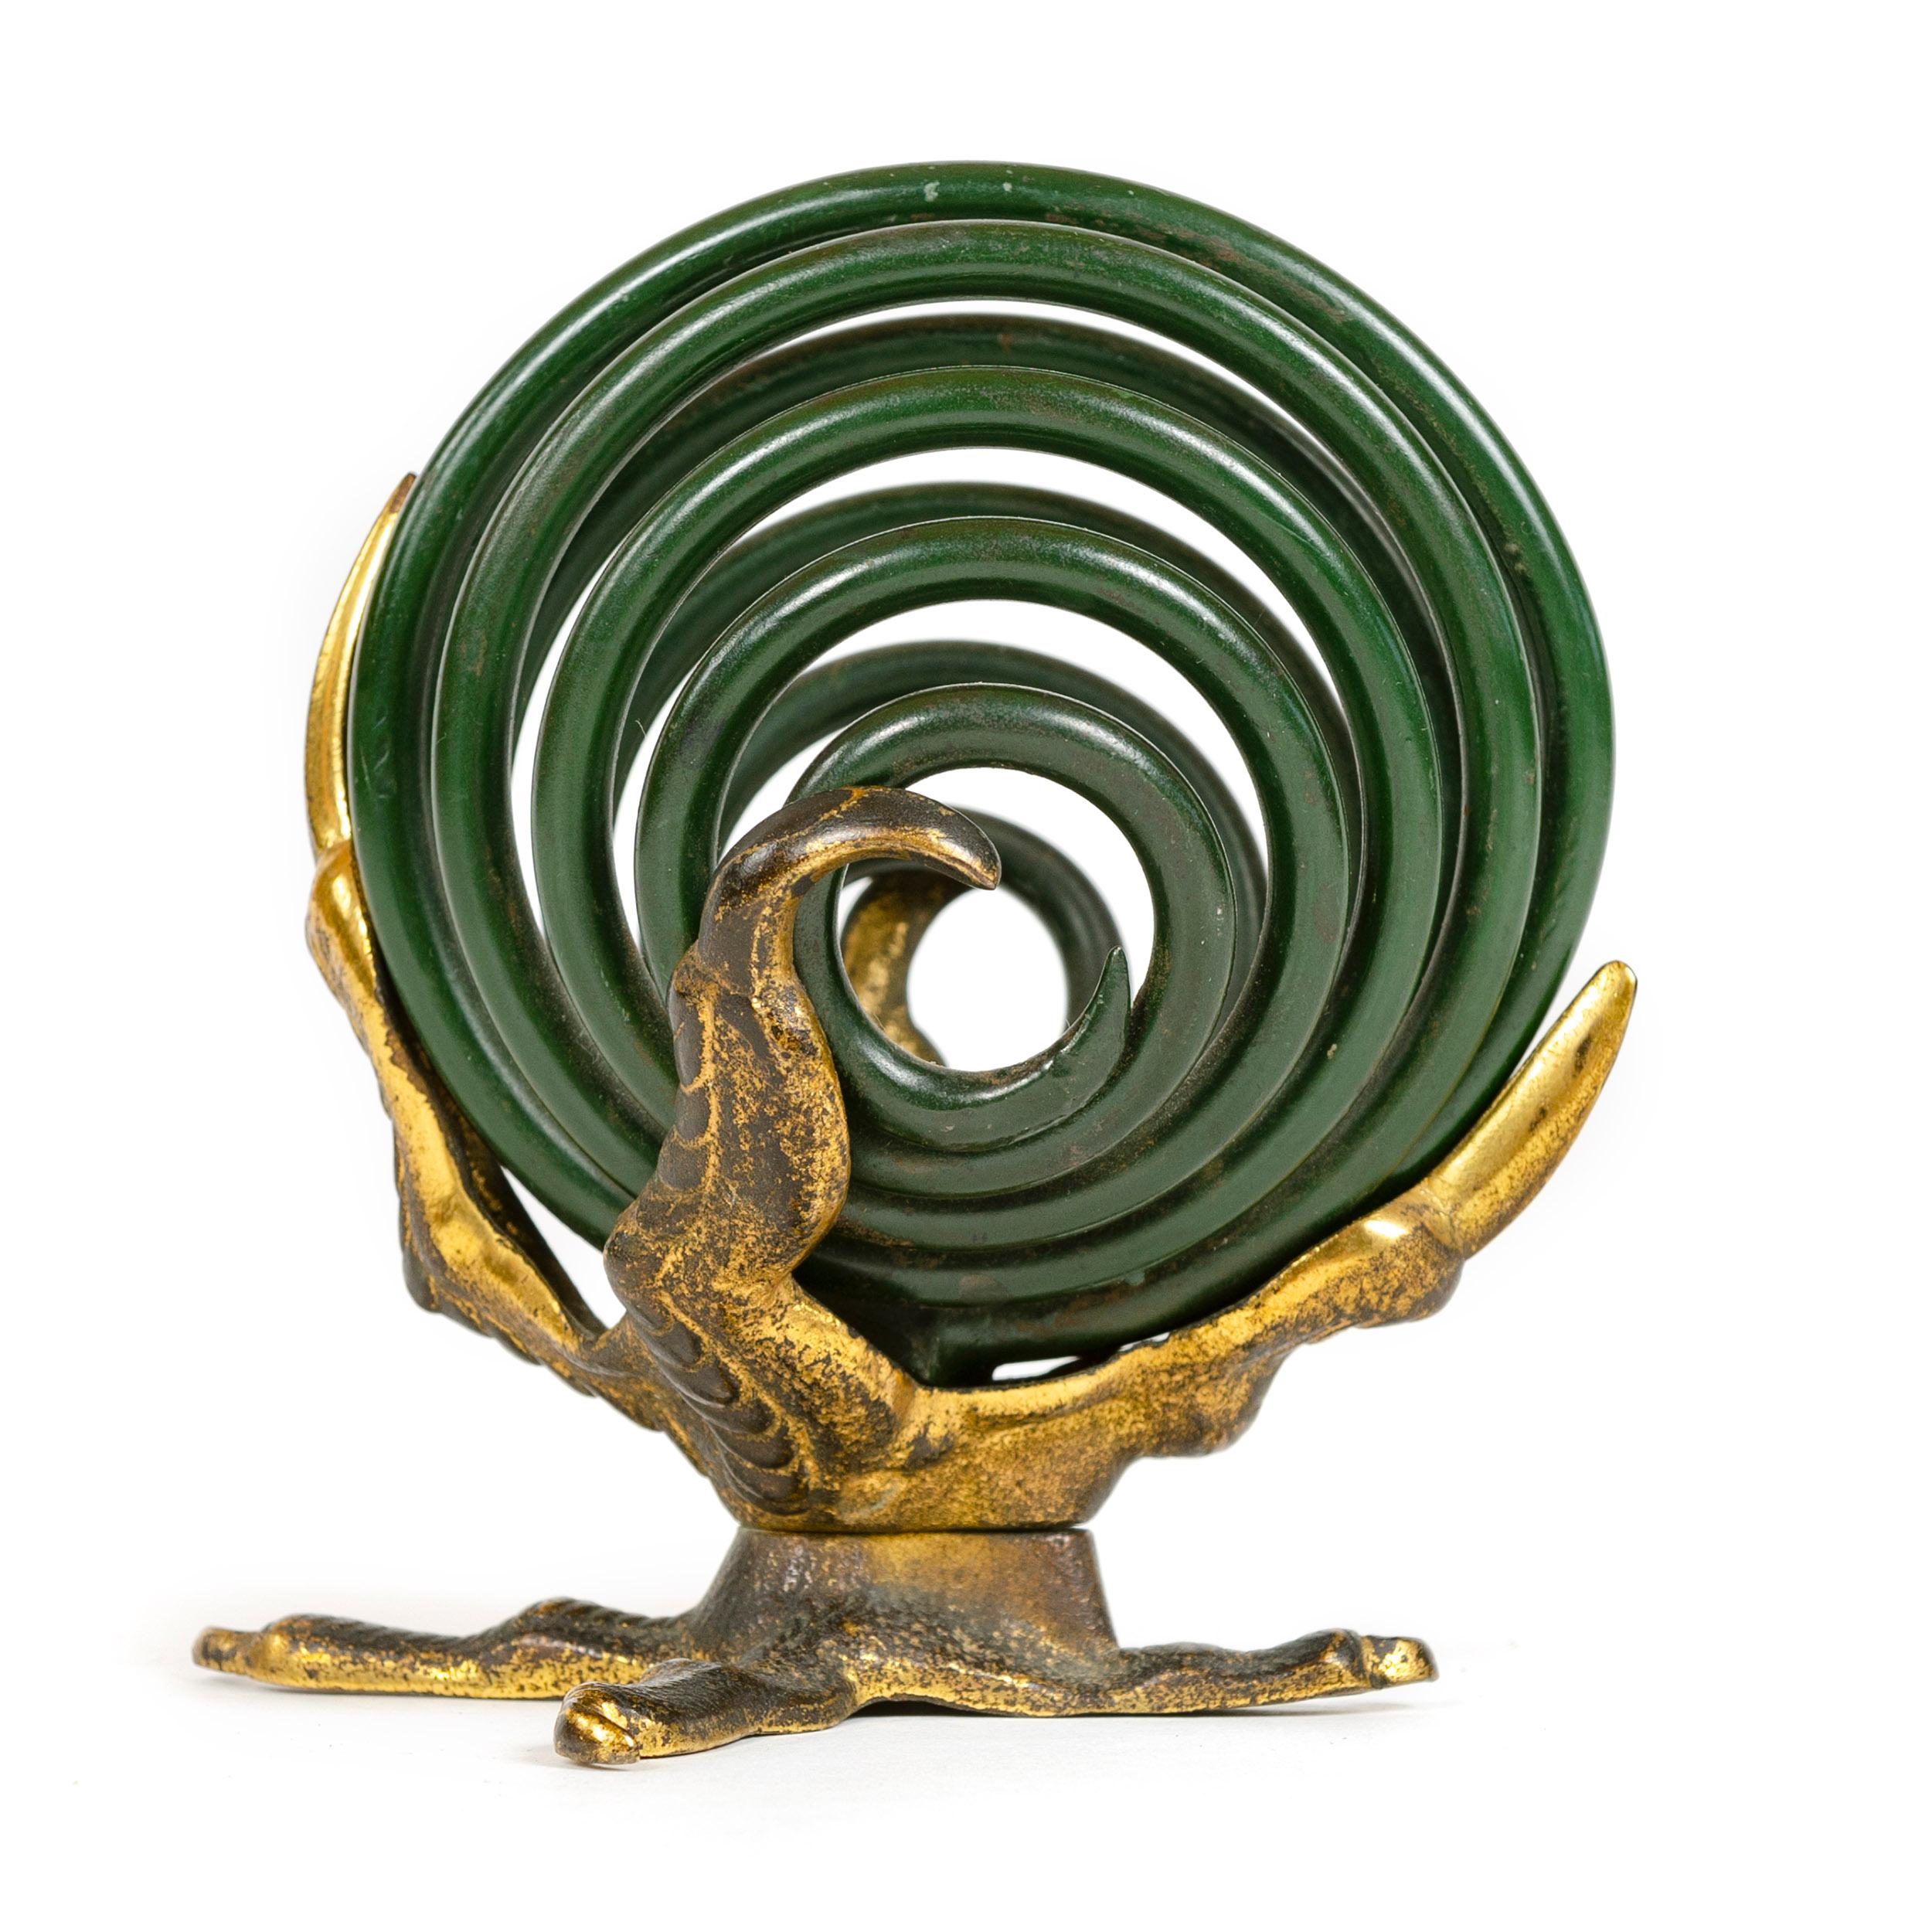 A curious desk accessory useful as a note or letter holder having three bronze talons grasping a coiled, spiral orb made from one continuous strand of thick steel finished in deep green enamel.
  